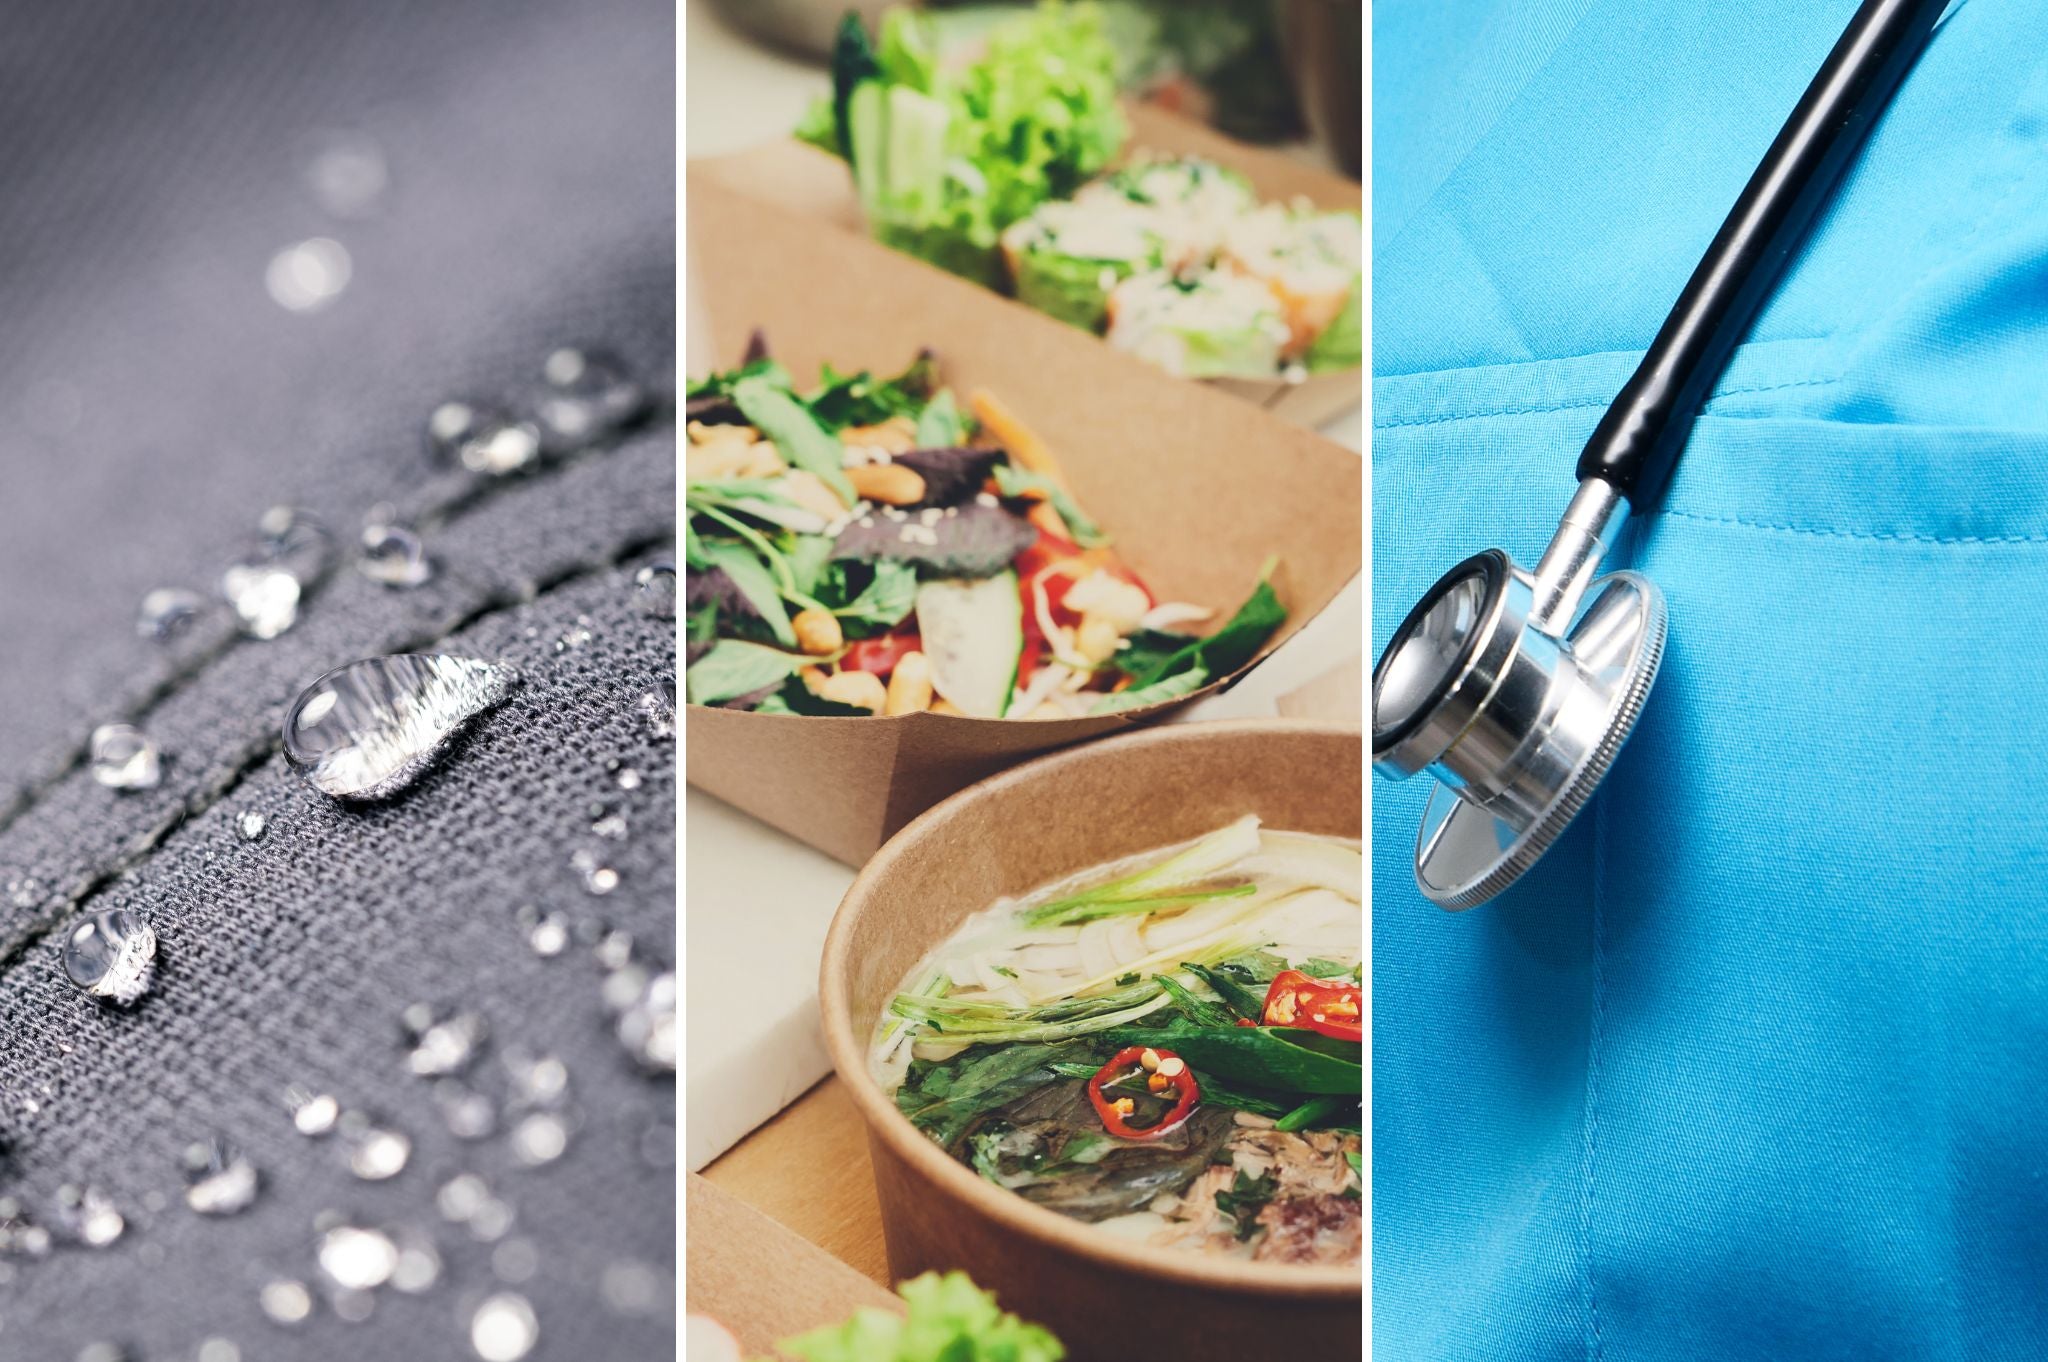 Collage of Waterproof Clothing, Recyclable Food Packaging and Medical Scrubs